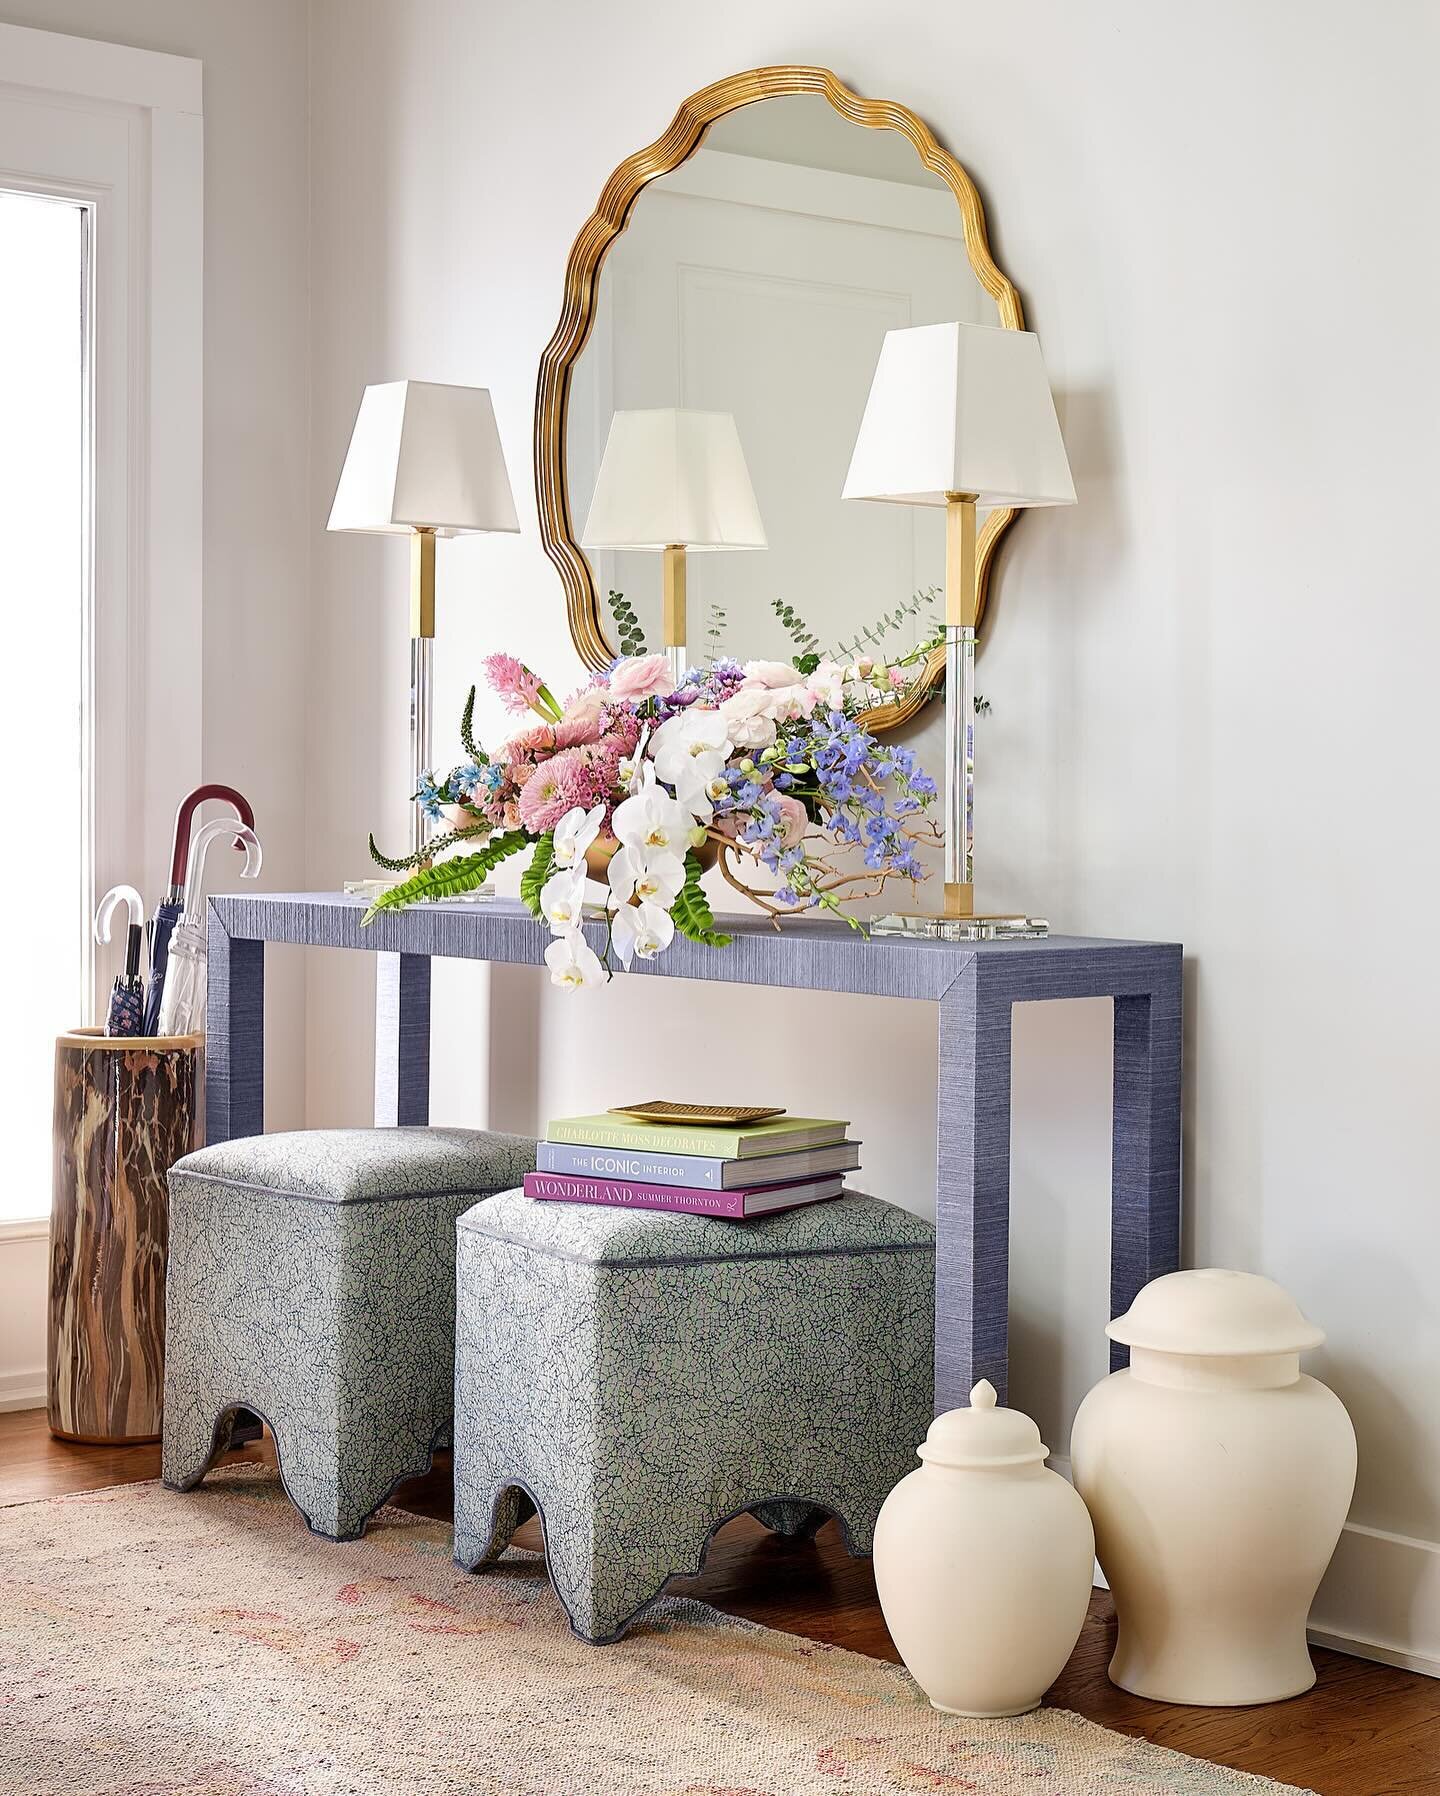 Doesn&rsquo;t this foyer make you feel that spring has sprung?